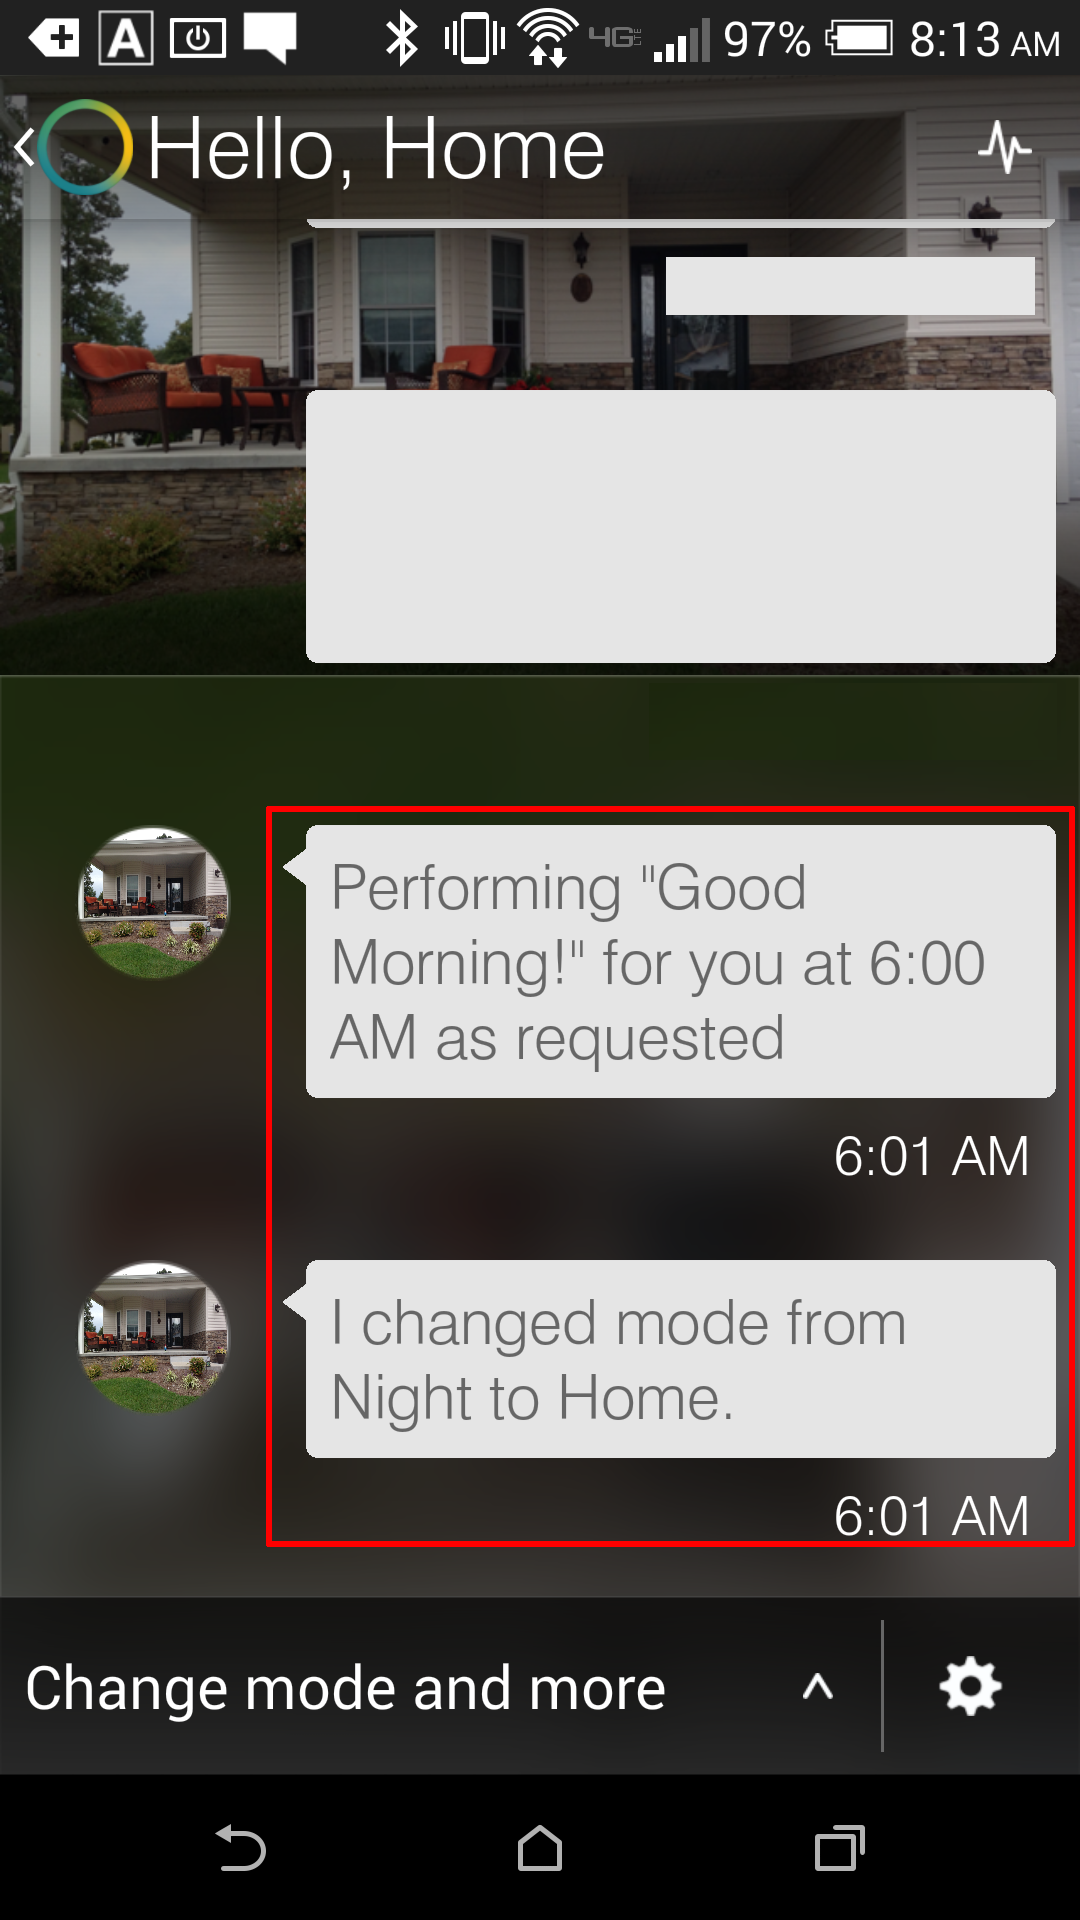 Smartthings App - Activity Feed - This activity shows that at 6:01 am, the "Good Morning" feature fired, setting the home hub to "Home" (our Day) mode.